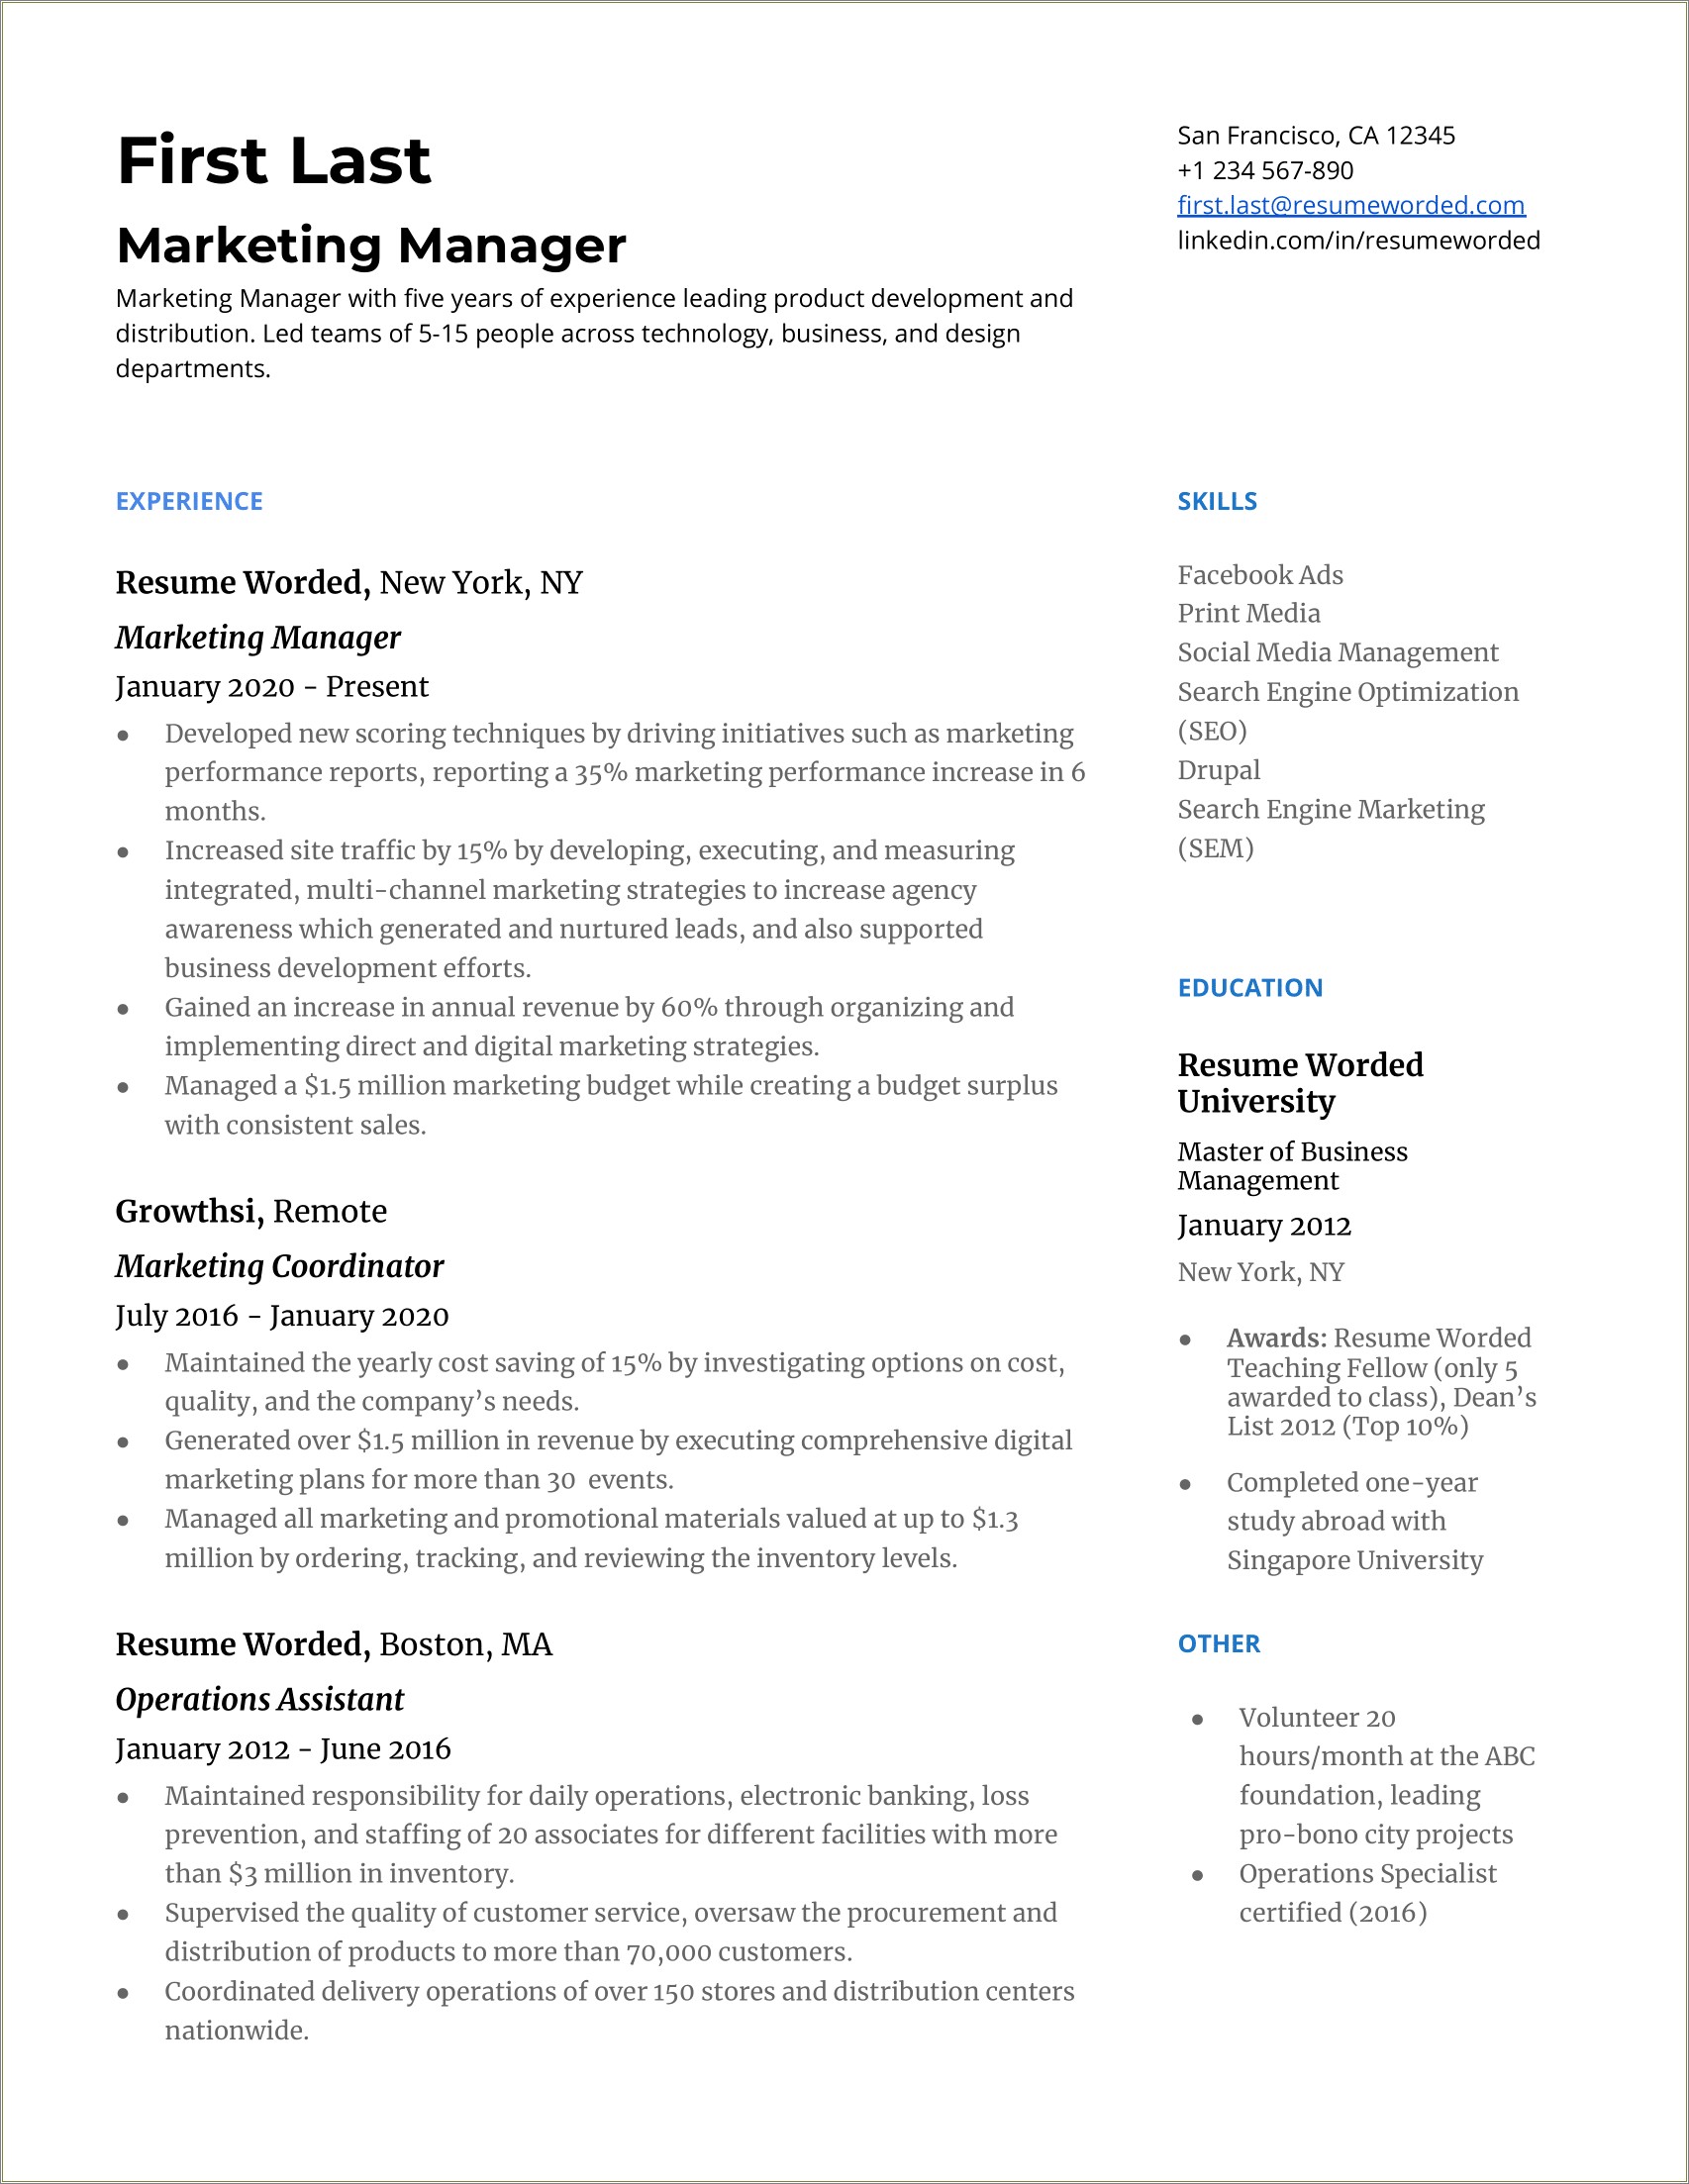 Best Skills To Have For Marketing On Resume